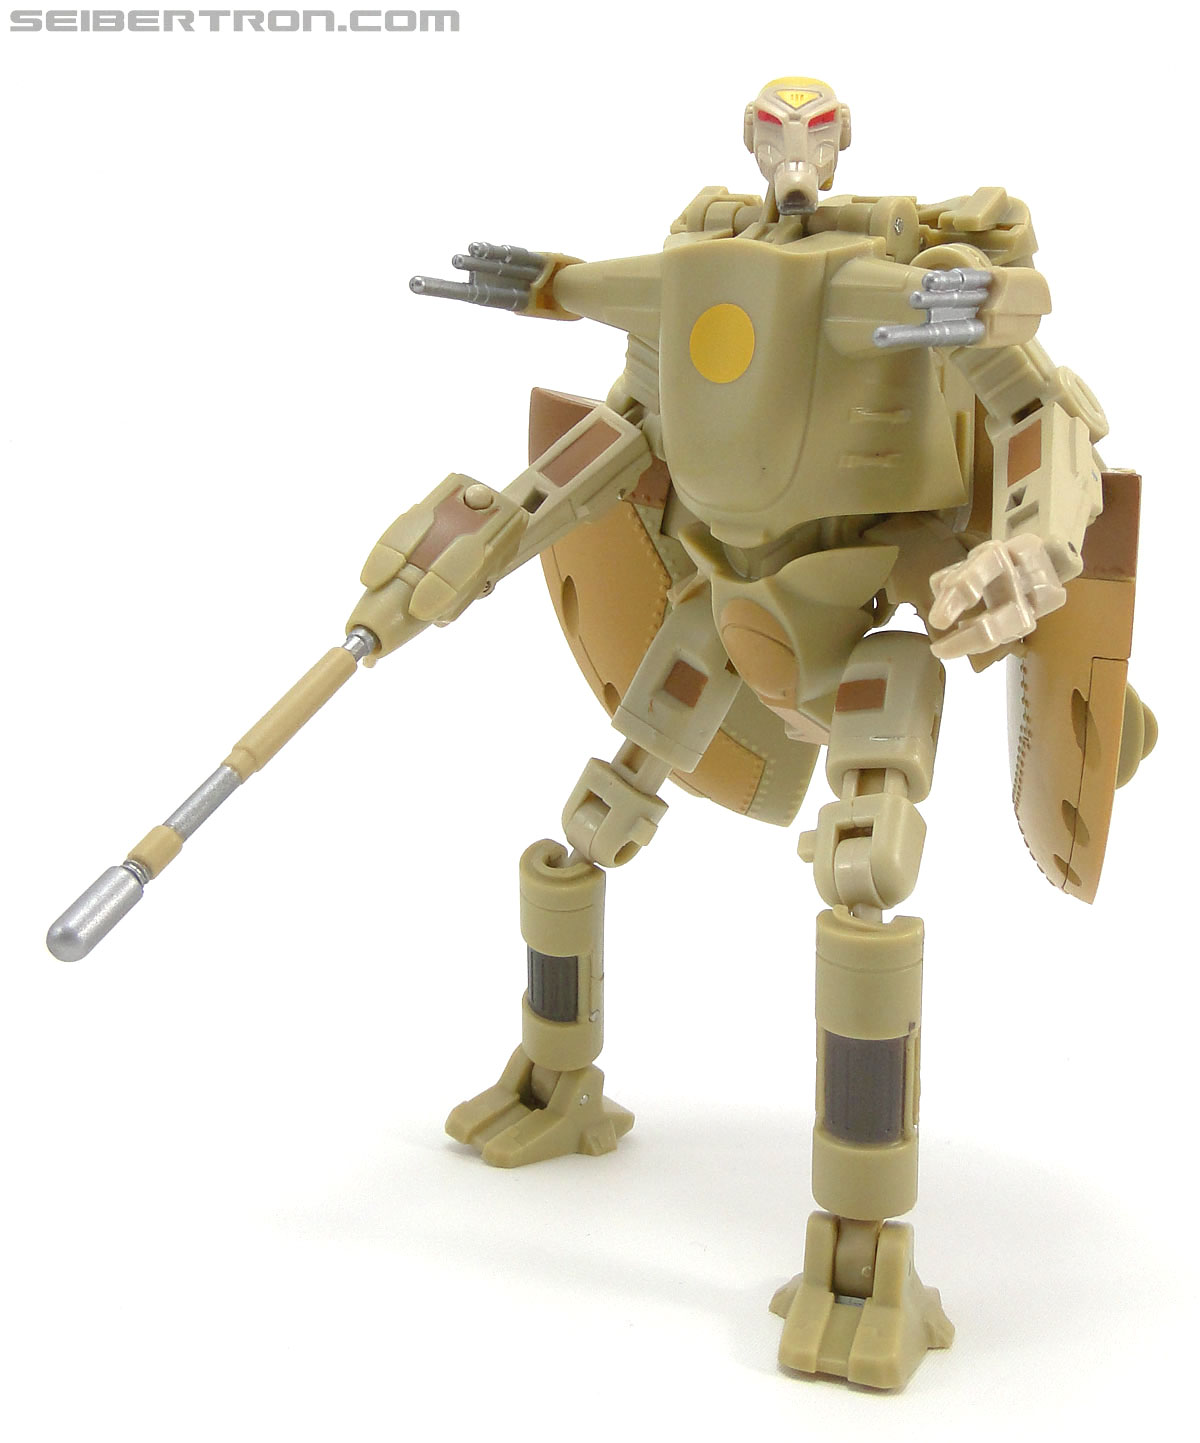 Star Wars Transformers Battle Droid Commader (Armored Assault Tank) (Battle Droid Commader) (Image #63 of 85)